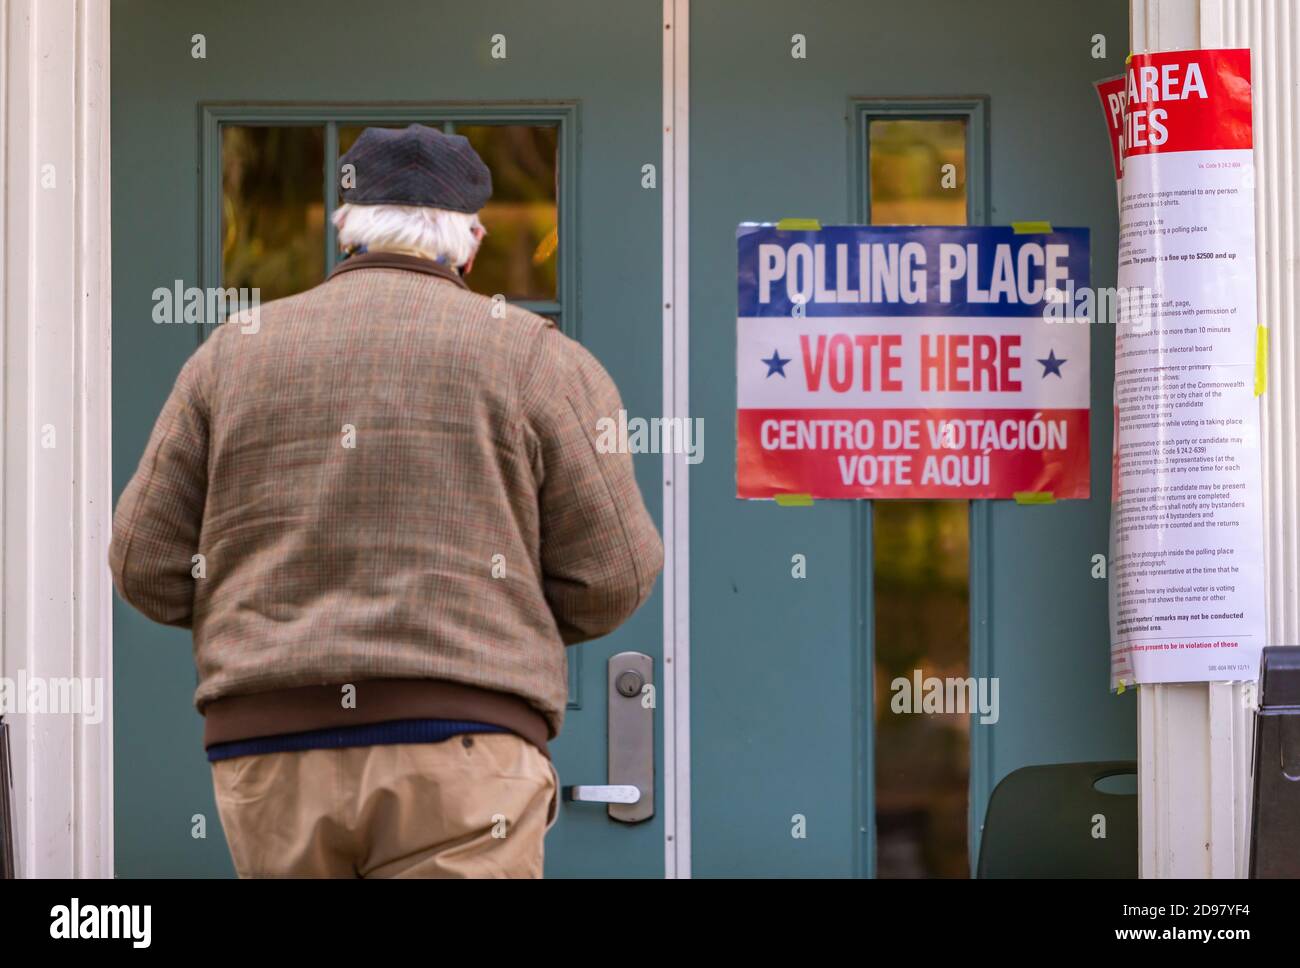 ARLINGTON, VIRGINIA, USA, NOVEMBER 3, 2020 - Man enters polling place during voting on presidential election day in northern Virginia. Credit: ©Rob Crandall/Alamy Live News Stock Photo